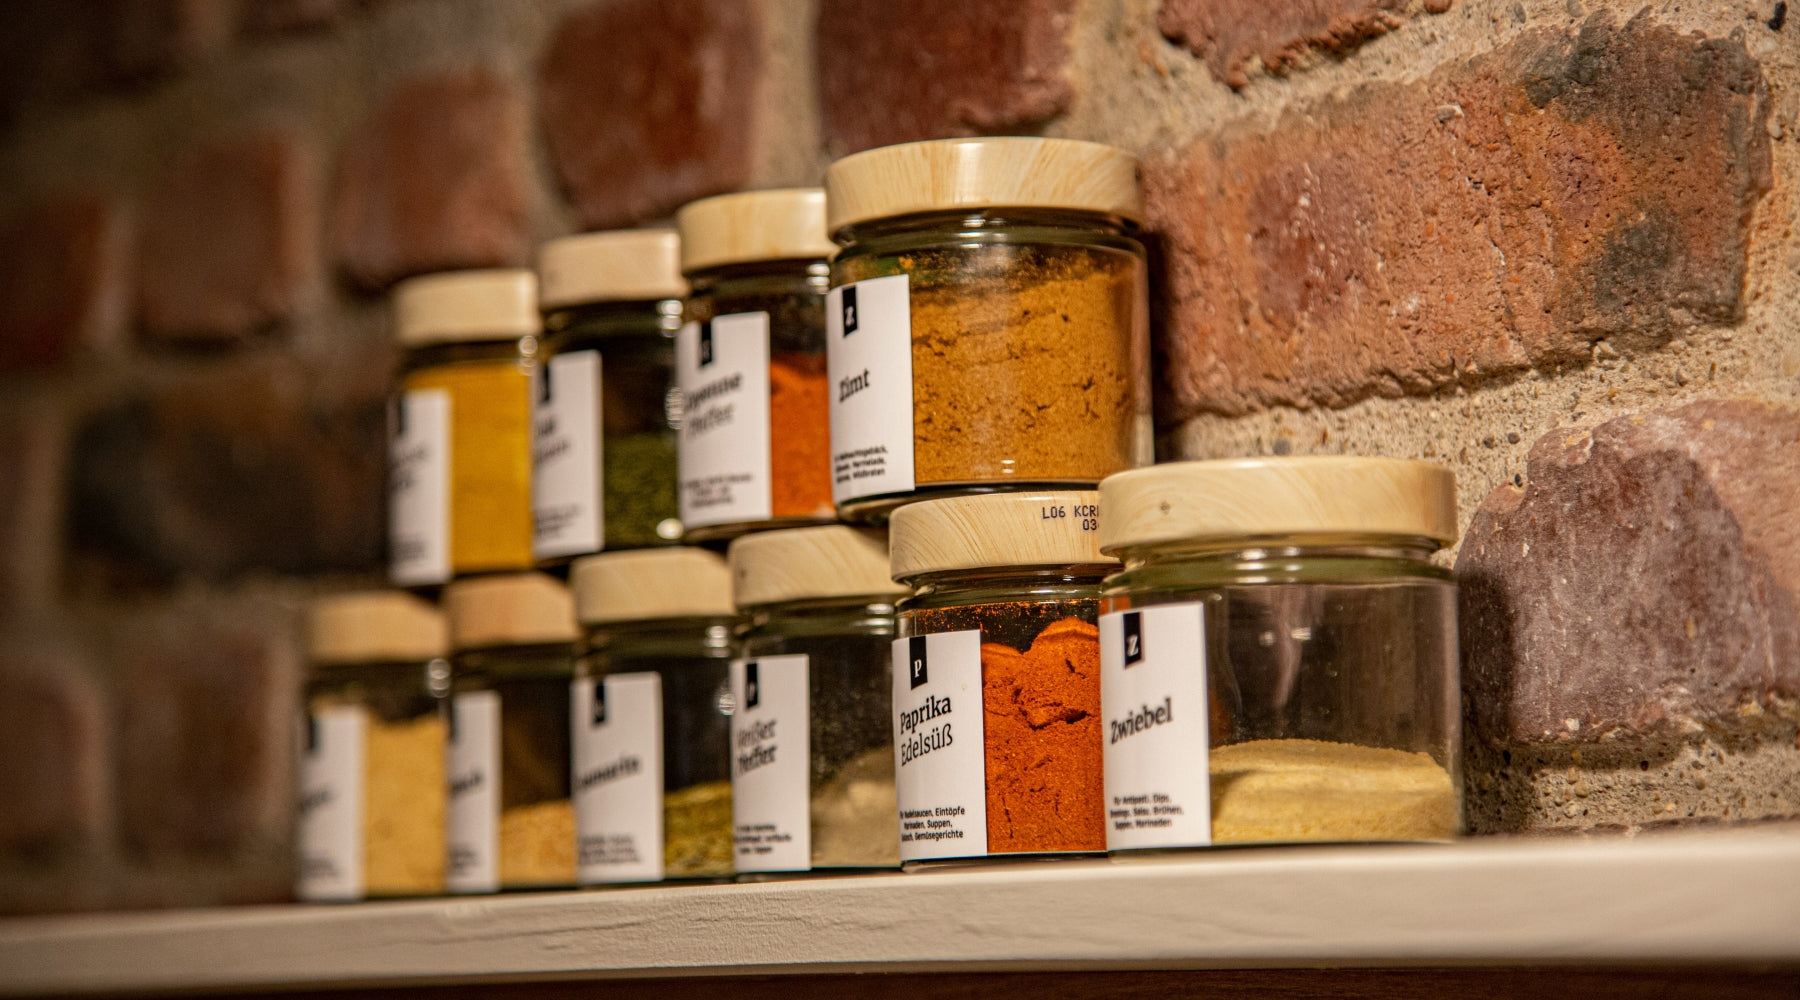 9 Practical Label Options for the Spice Jars